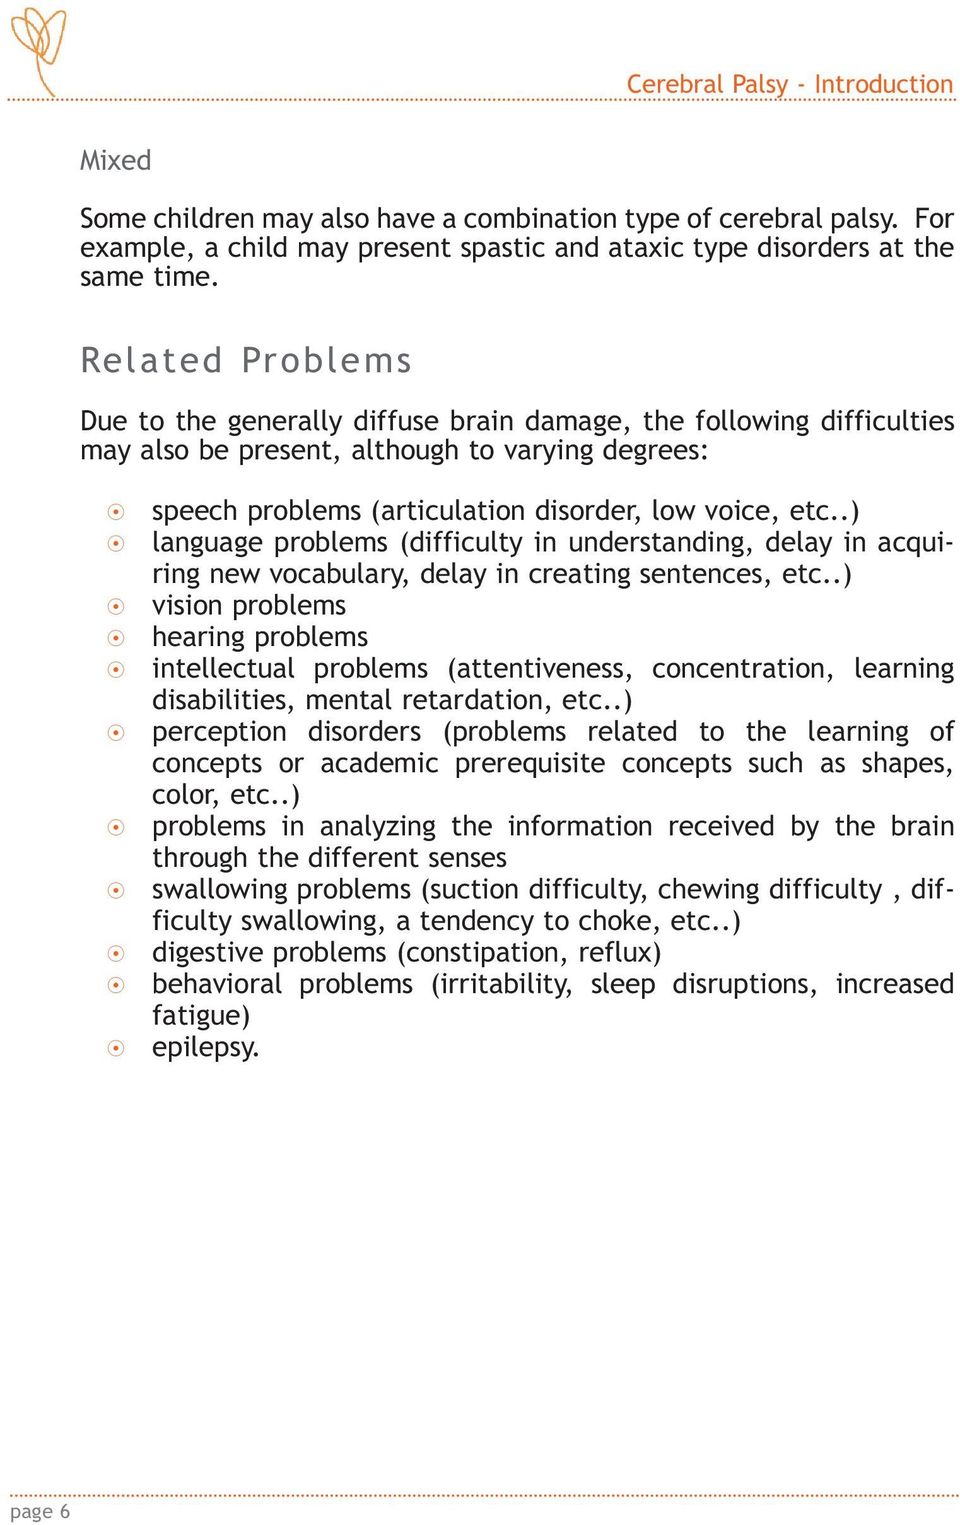 .) 8 language problems (difficulty in understanding, delay in acquiring new vocabulary, delay in creating sentences, etc.